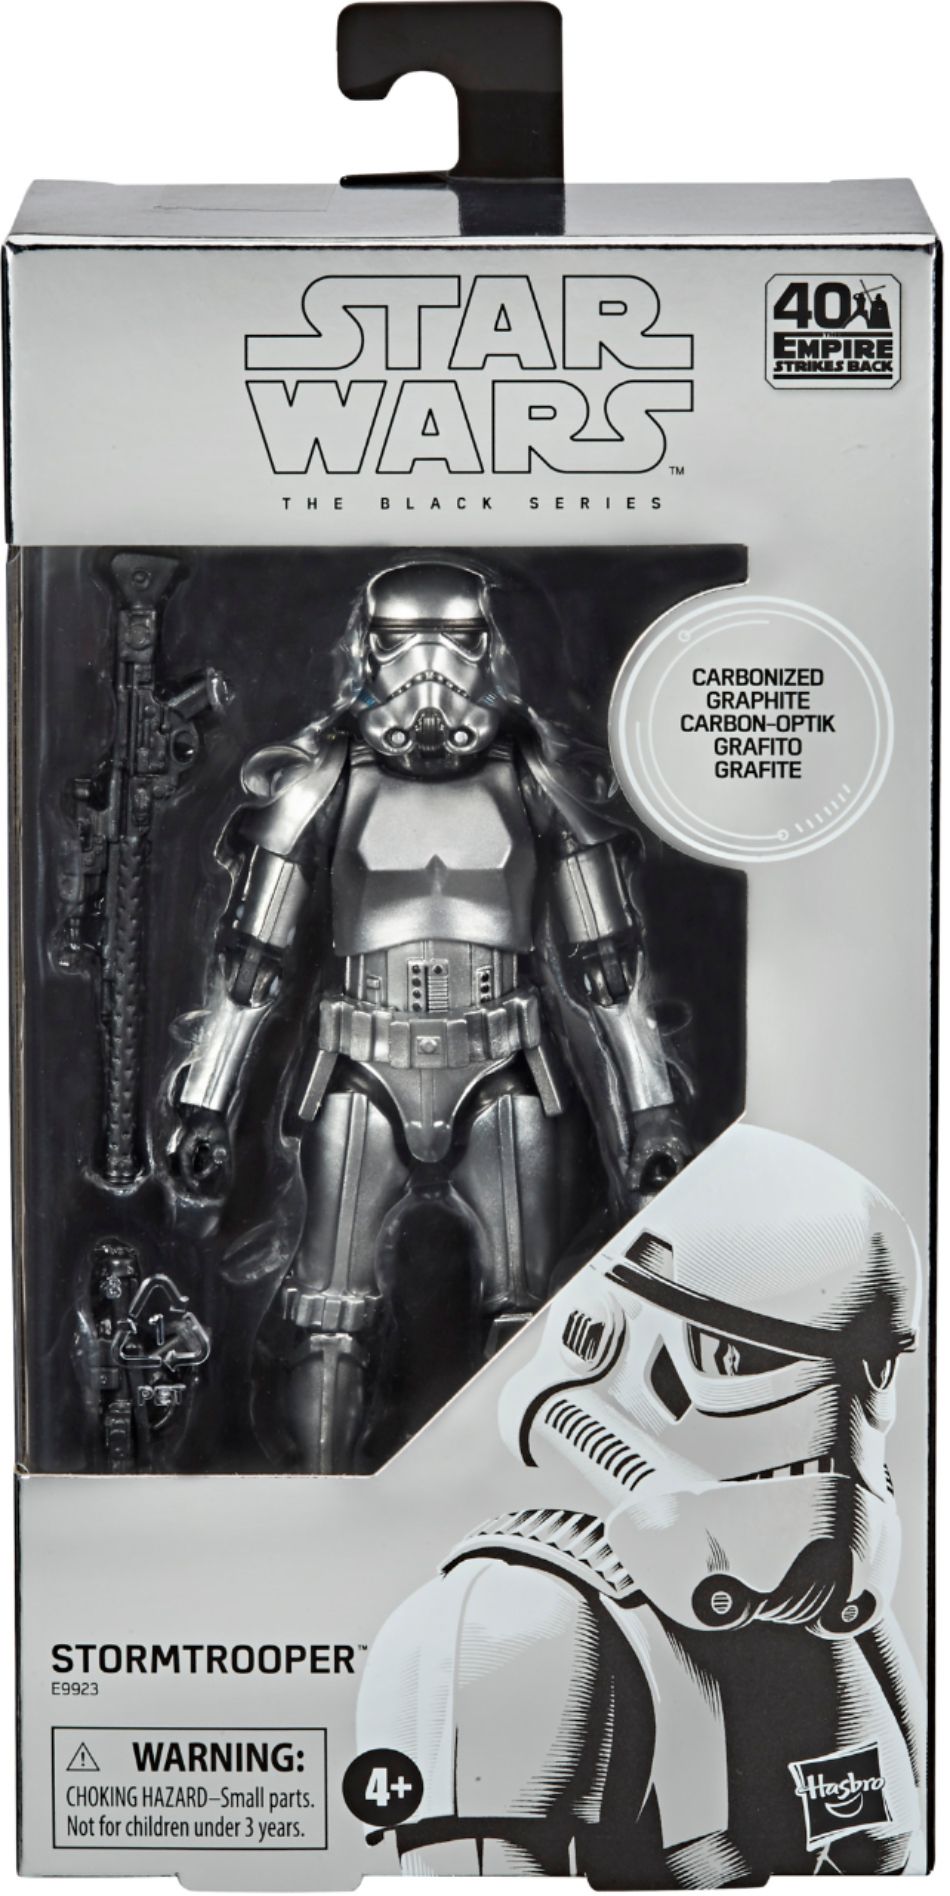 Star Wars The Black Series Carbonized Stormtrooper 6-Inch Figure